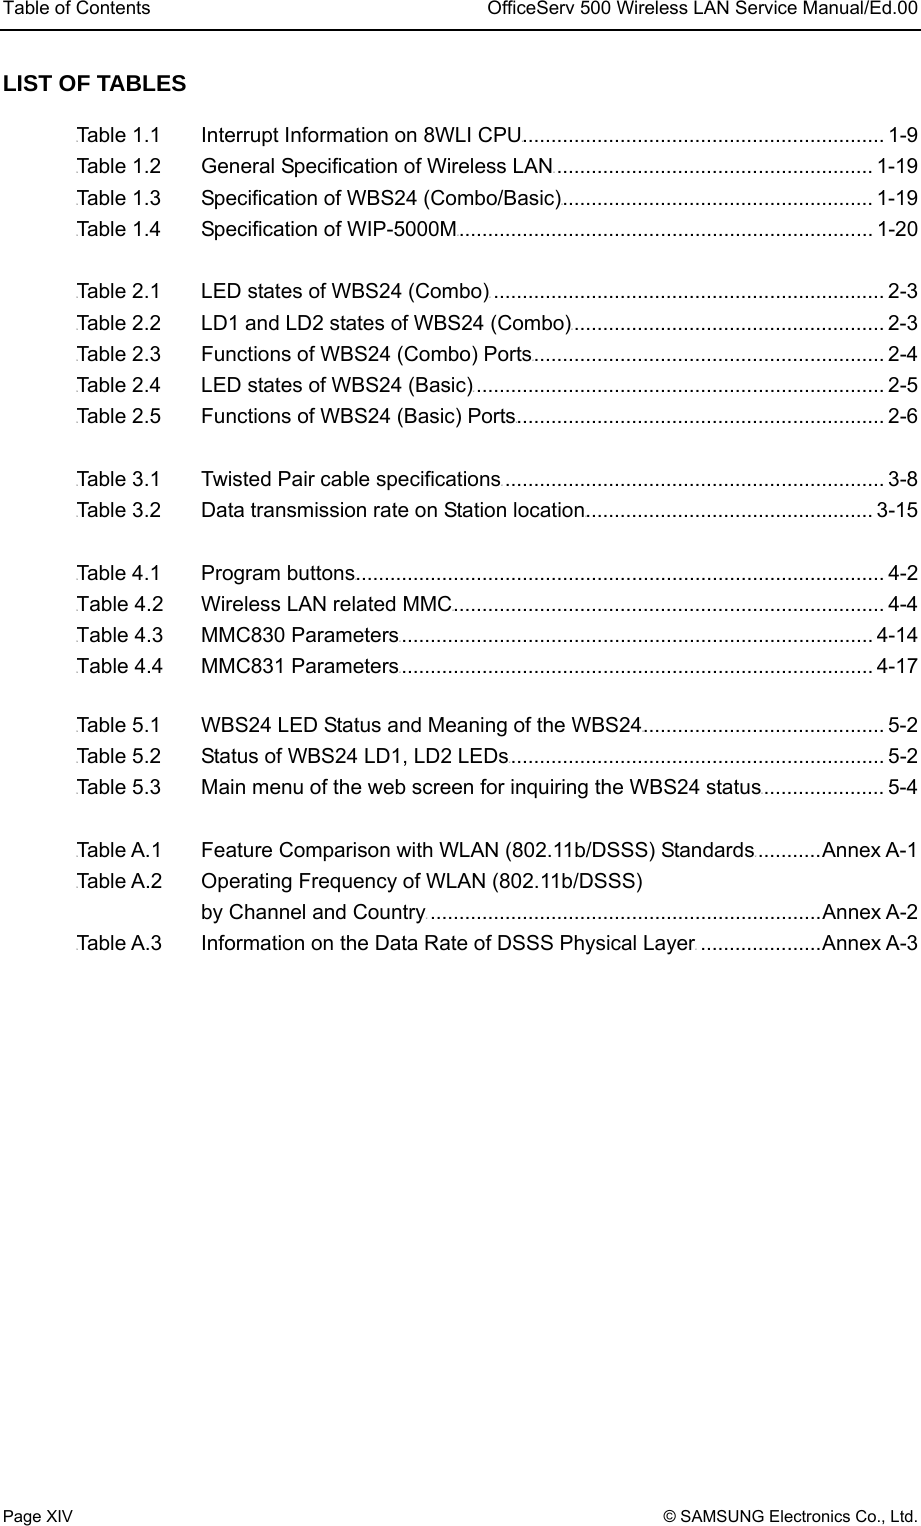 Table of Contents  OfficeServ 500 Wireless LAN Service Manual/Ed.00 Page XIV © SAMSUNG Electronics Co., Ltd. LIST OF TABLES UTable 1.1      Interrupt Information on 8WLI CPUU............................................................... 1-9 UTable 1.2      General Specification of Wireless LANU....................................................... 1-19 UTable 1.3      Specification of WBS24 (Combo/Basic)U...................................................... 1-19 UTable 1.4    Specification of WIP-5000MU........................................................................ 1-20  UTable 2.1      LED states of WBS24 (Combo)U.................................................................... 2-3 UTable 2.2      LD1 and LD2 states of WBS24 (Combo)U...................................................... 2-3 UTable 2.3      Functions of WBS24 (Combo) PortsU............................................................. 2-4 UTable 2.4      LED states of WBS24 (Basic)U....................................................................... 2-5 UTable 2.5      Functions of WBS24 (Basic) PortsU................................................................ 2-6  UTable 3.1      Twisted Pair cable specificationsU.................................................................. 3-8 UTable 3.2      Data transmission rate on Station locationU.................................................. 3-15  UTable 4.1    Program buttonsU............................................................................................ 4-2 UTable 4.2      Wireless LAN related MMCU........................................................................... 4-4 UTable 4.3    MMC830 ParametersU.................................................................................. 4-14 UTable 4.4    MMC831 ParametersU.................................................................................. 4-17  UTable 5.1      WBS24 LED Status and Meaning of the WBS24U.......................................... 5-2 UTable 5.2      Status of WBS24 LD1, LD2 LEDsU................................................................. 5-2 UTable 5.3      Main menu of the web screen for inquiring the WBS24 statusU..................... 5-4  UTable A.1    Feature Comparison with WLAN (802.11b/DSSS) StandardsU...........Annex A-1 UTable A.2      Operating Frequency of WLAN (802.11b/DSSS)       by Channel and CountryU....................................................................Annex A-2 UTable A.3      Information on the Data Rate of DSSS Physical LayerU.....................Annex A-3   